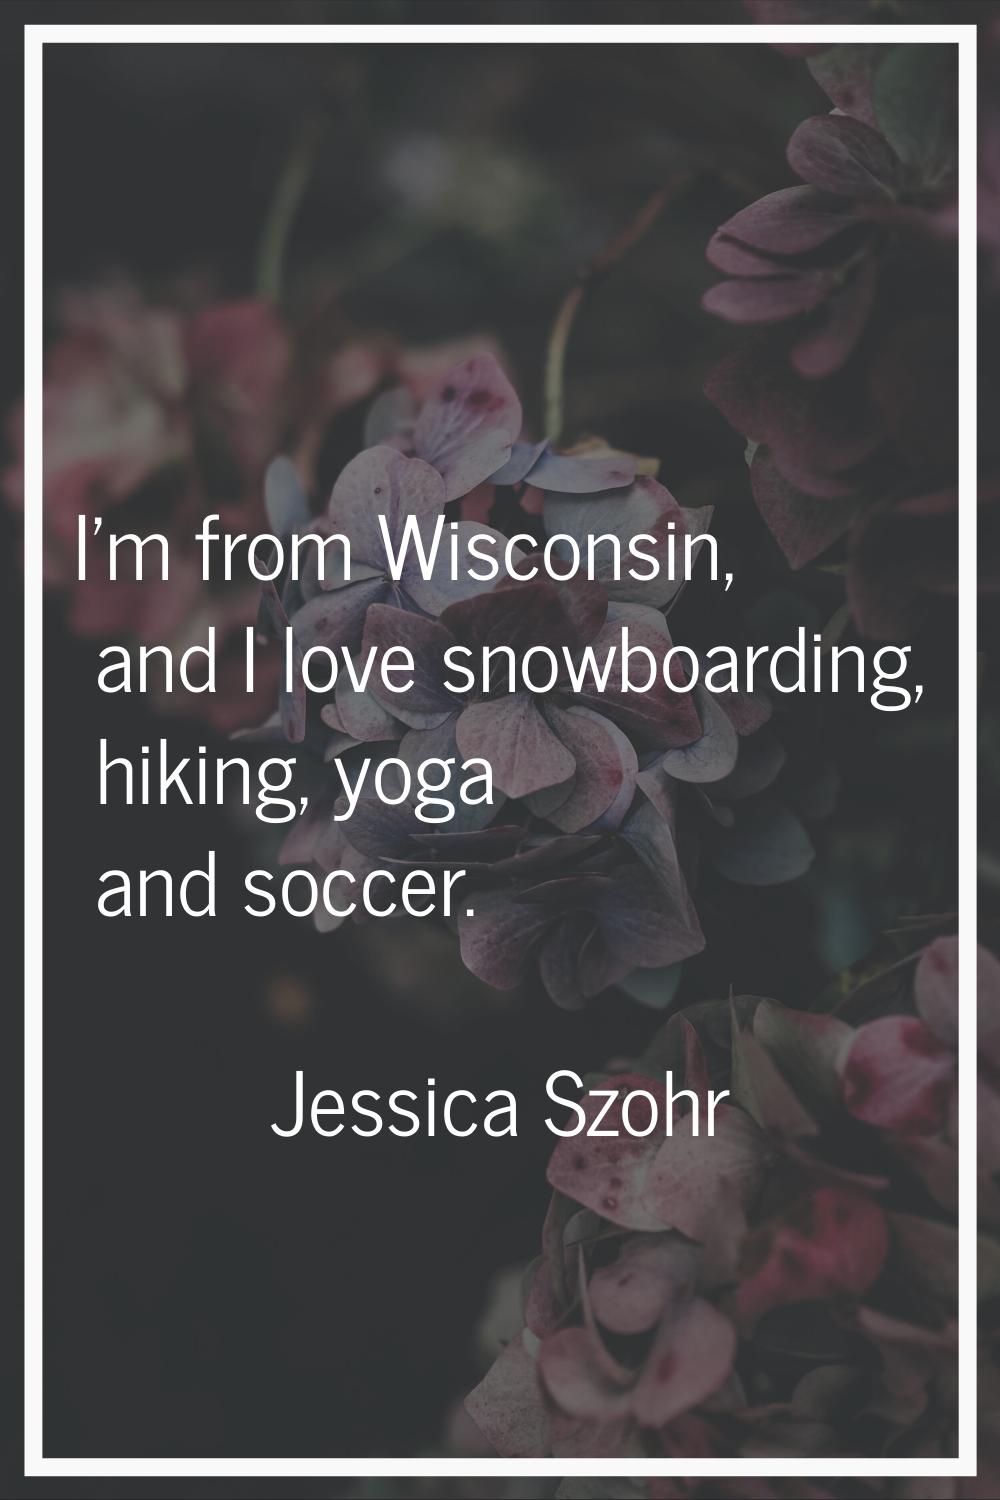 I'm from Wisconsin, and I love snowboarding, hiking, yoga and soccer.